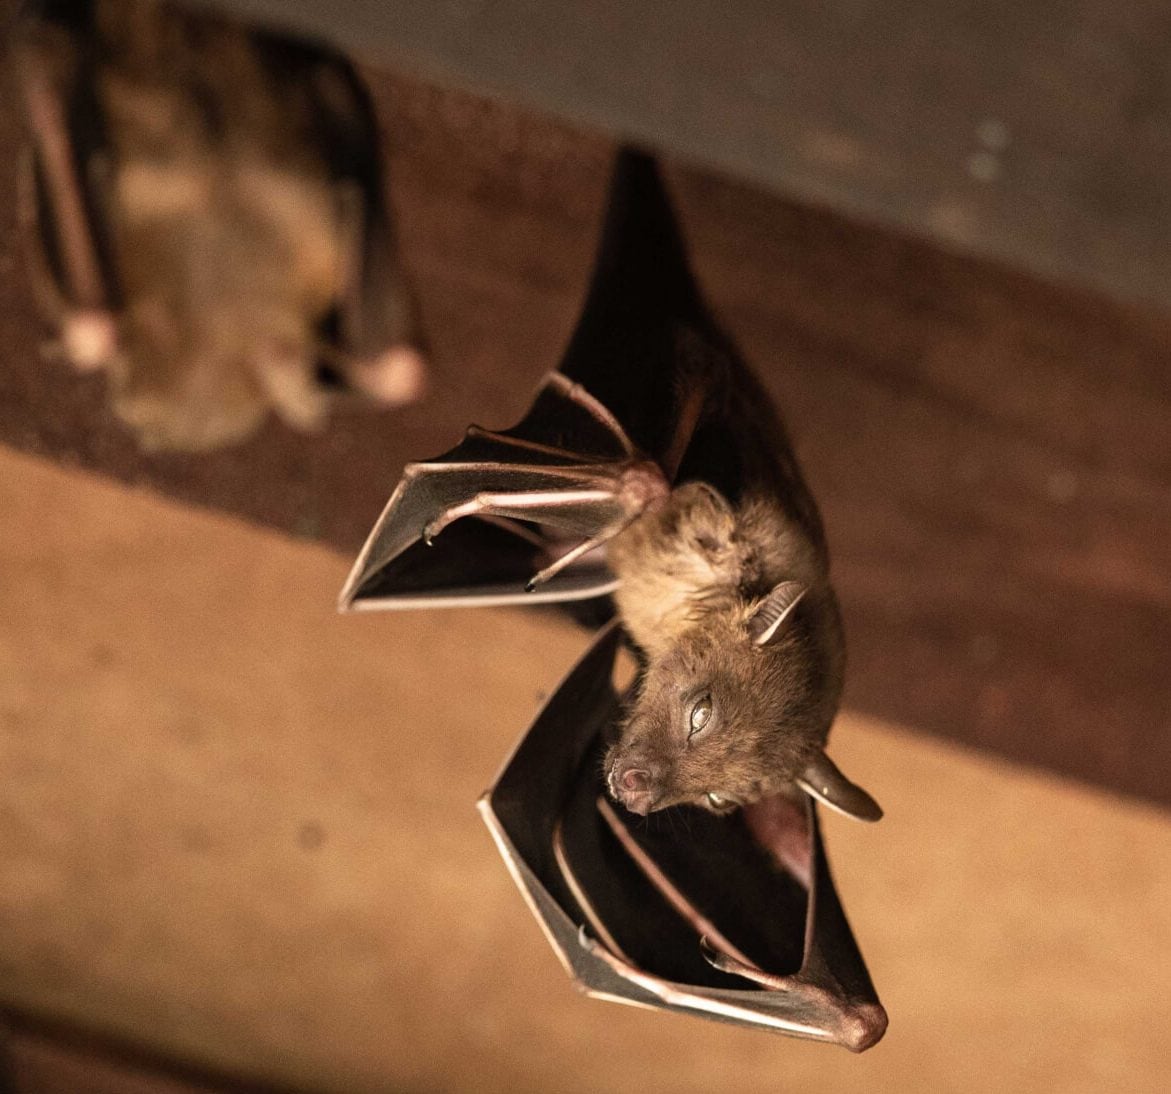 Expert bat removal services for a safe and humane solution in Milford